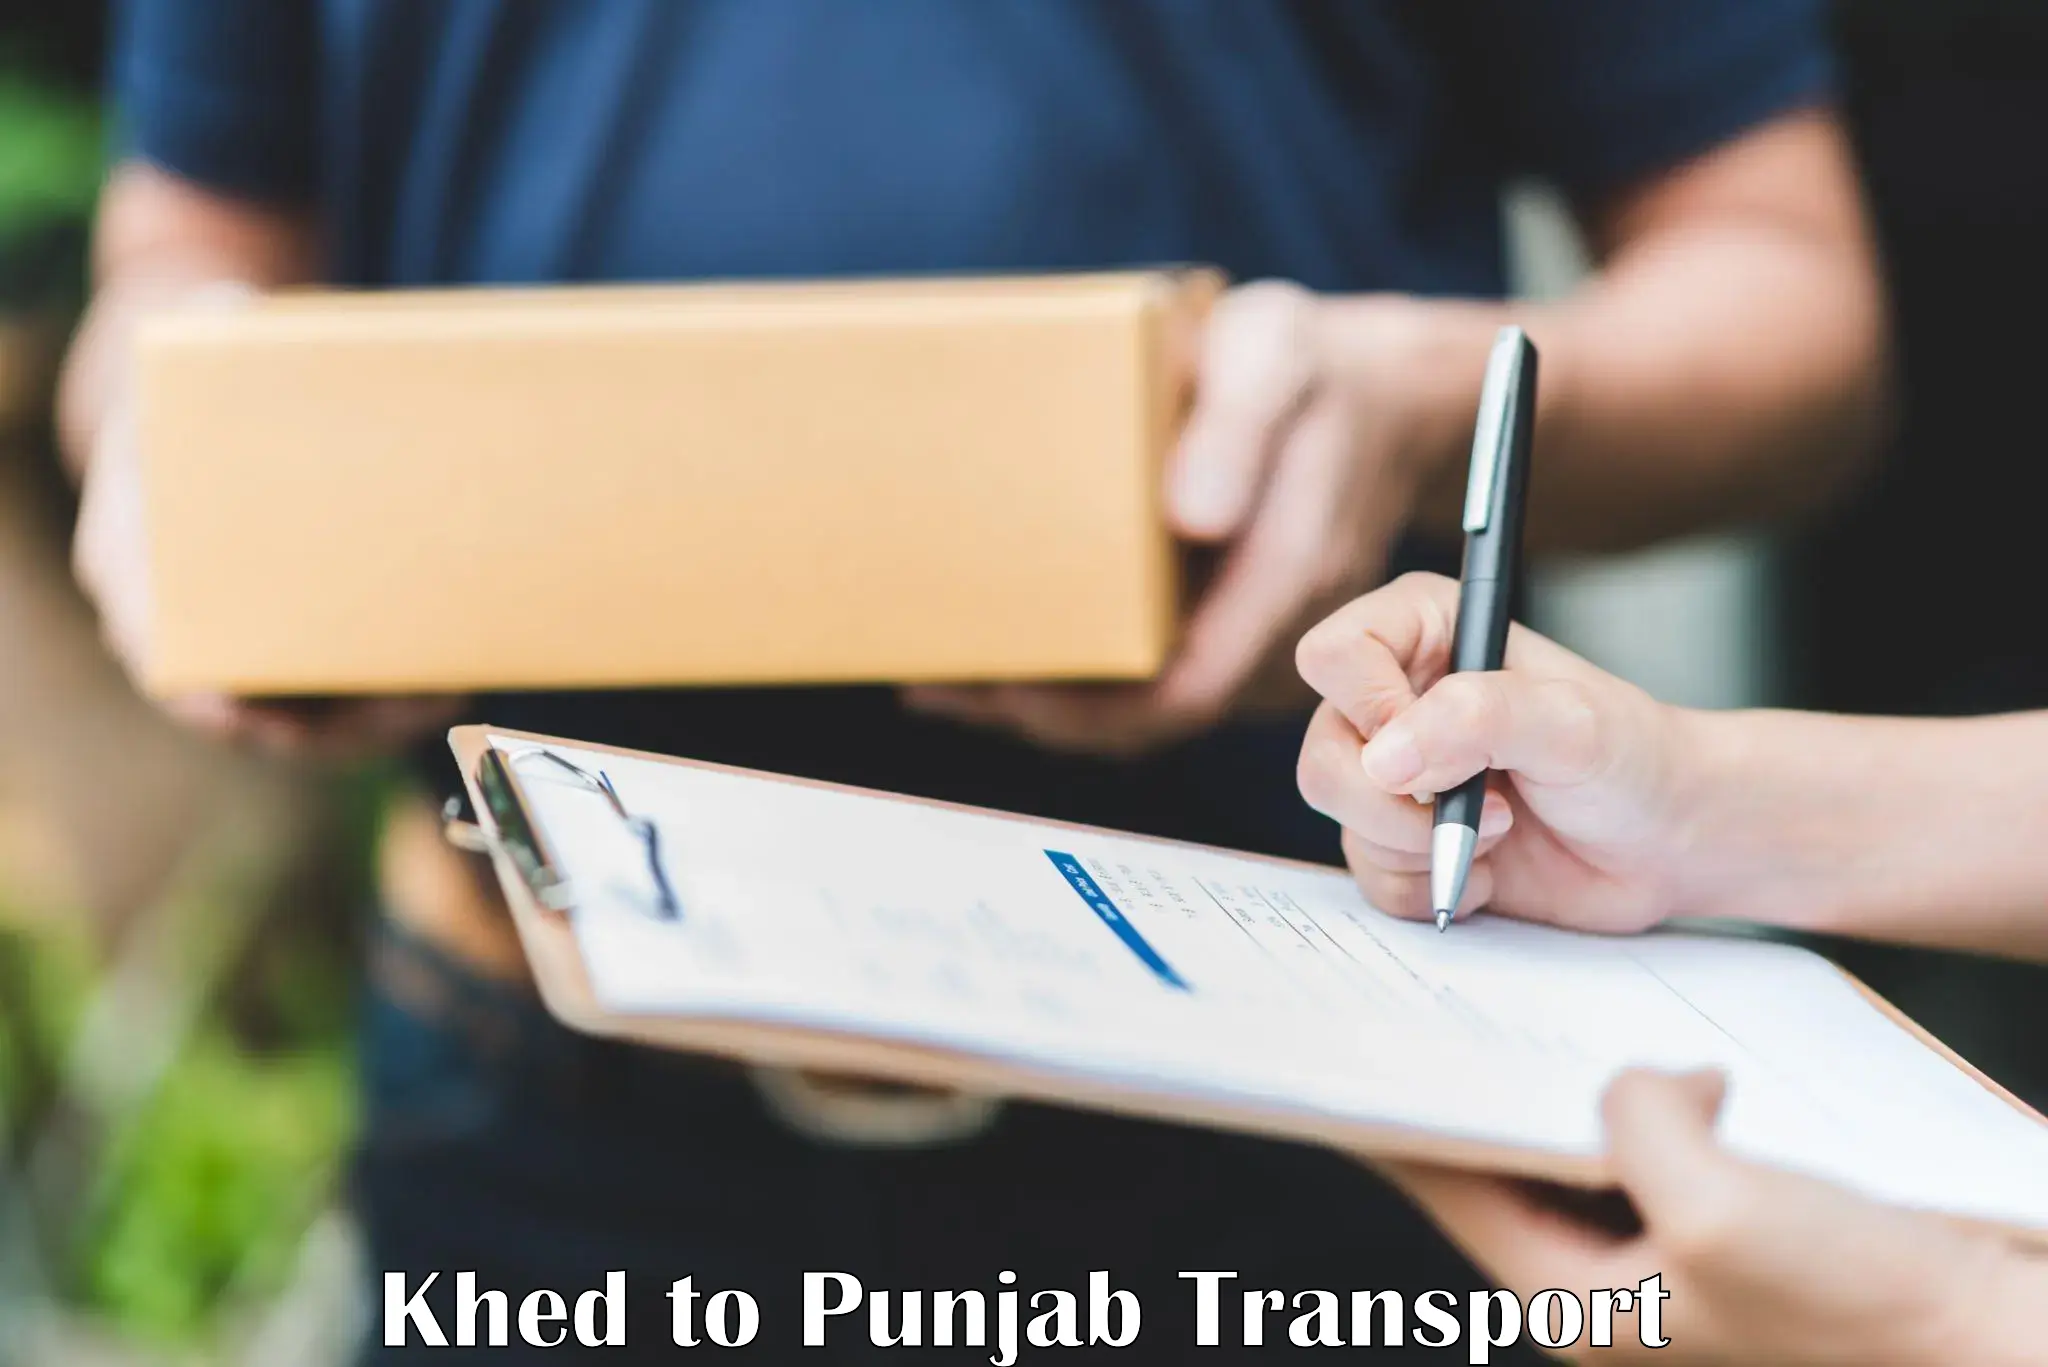 All India transport service Khed to Sultanpur Lodhi